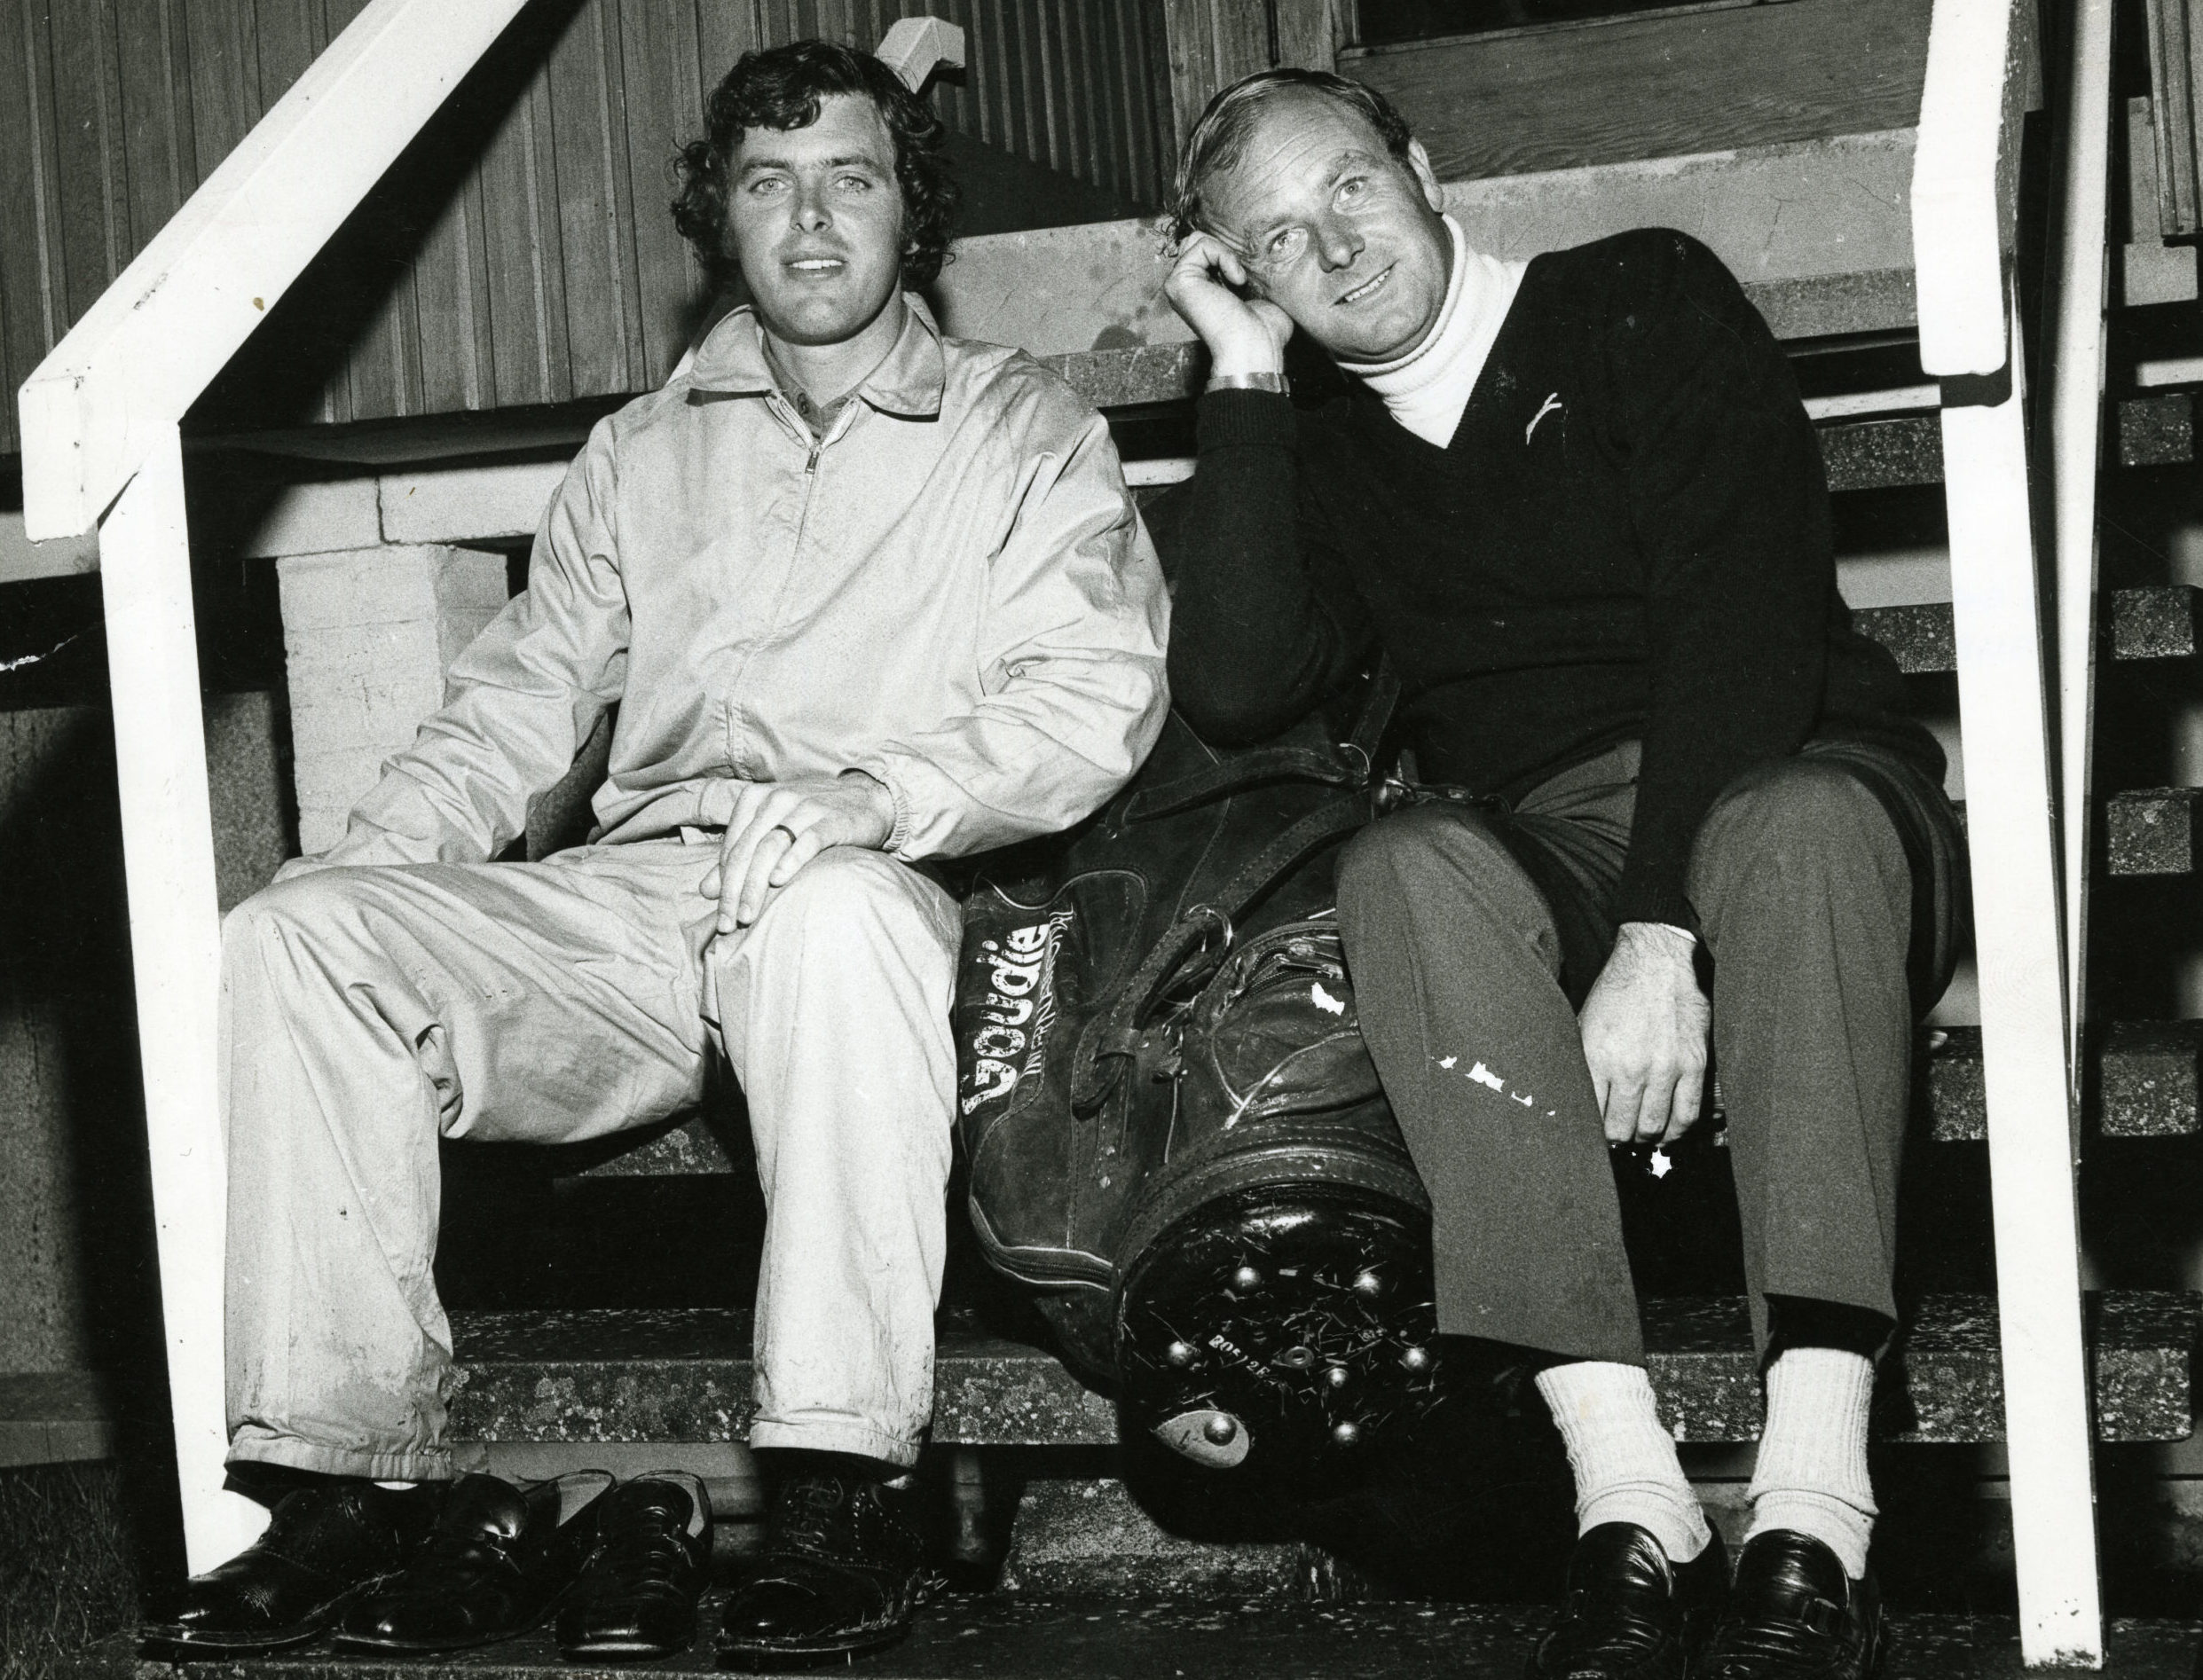 Bernard Gallacher and Ronnie Shade after the completion of their hectic day's golf.